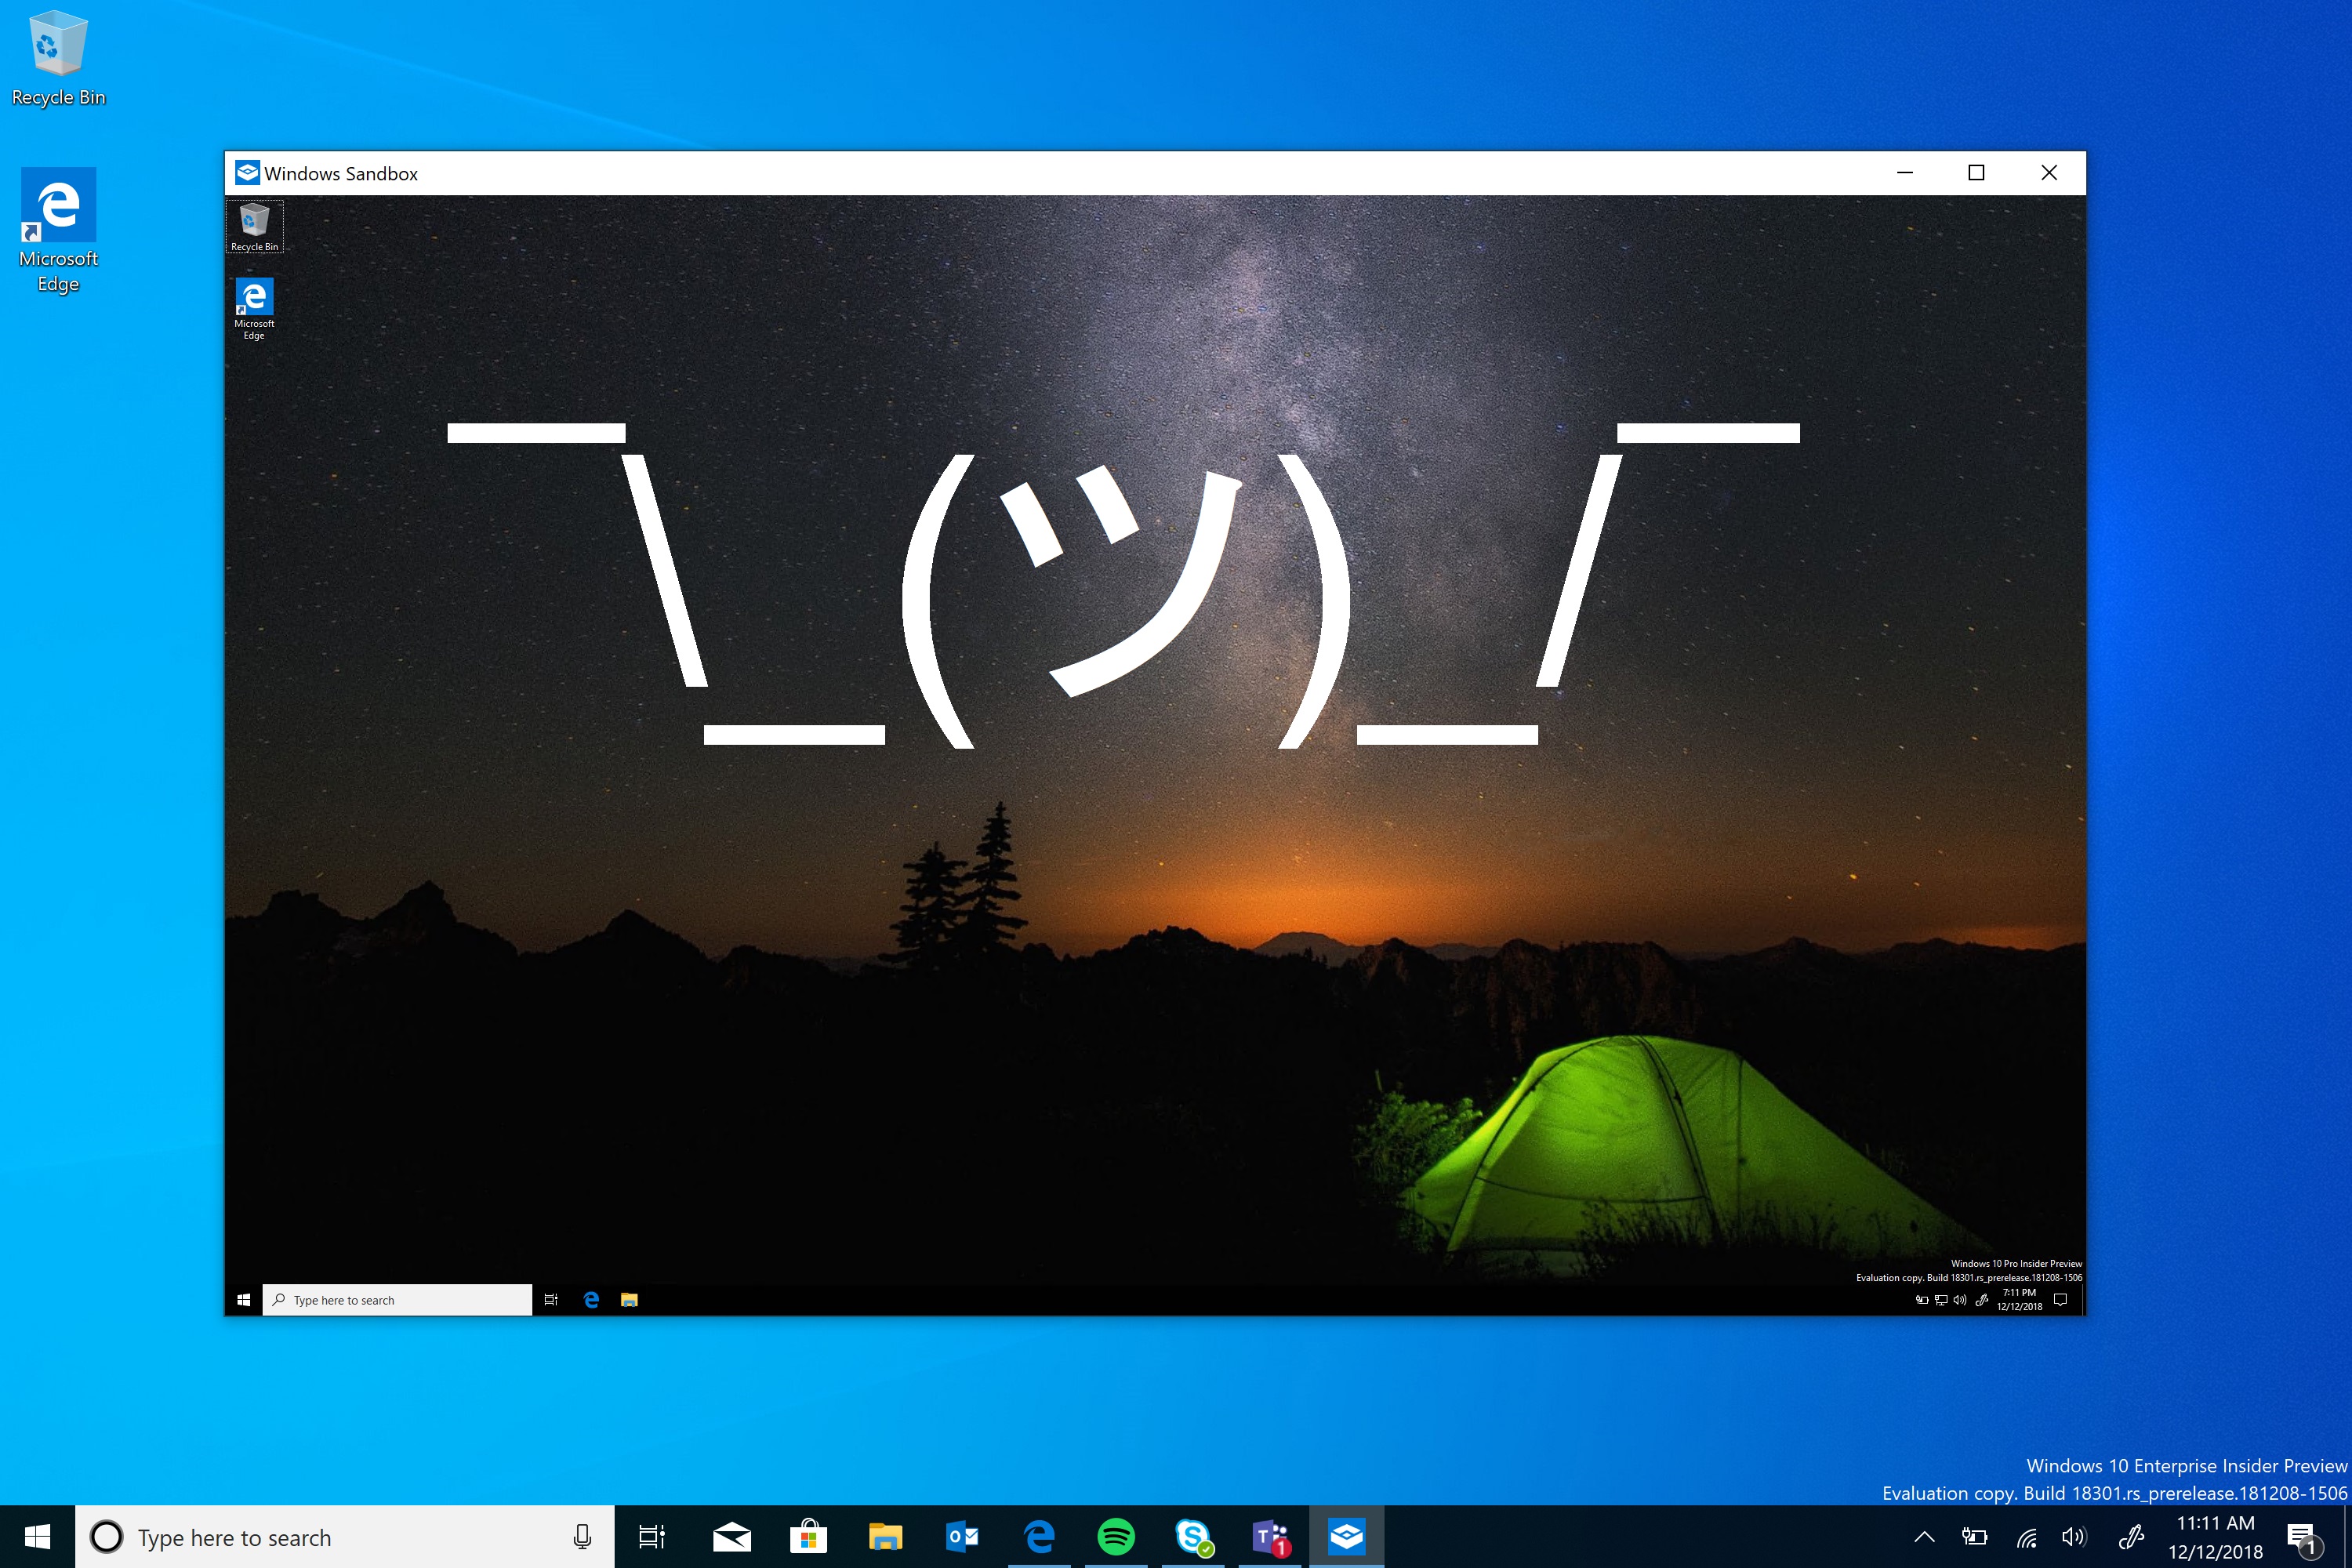 install windows 10 on a pc running windows 10 pro insider preview